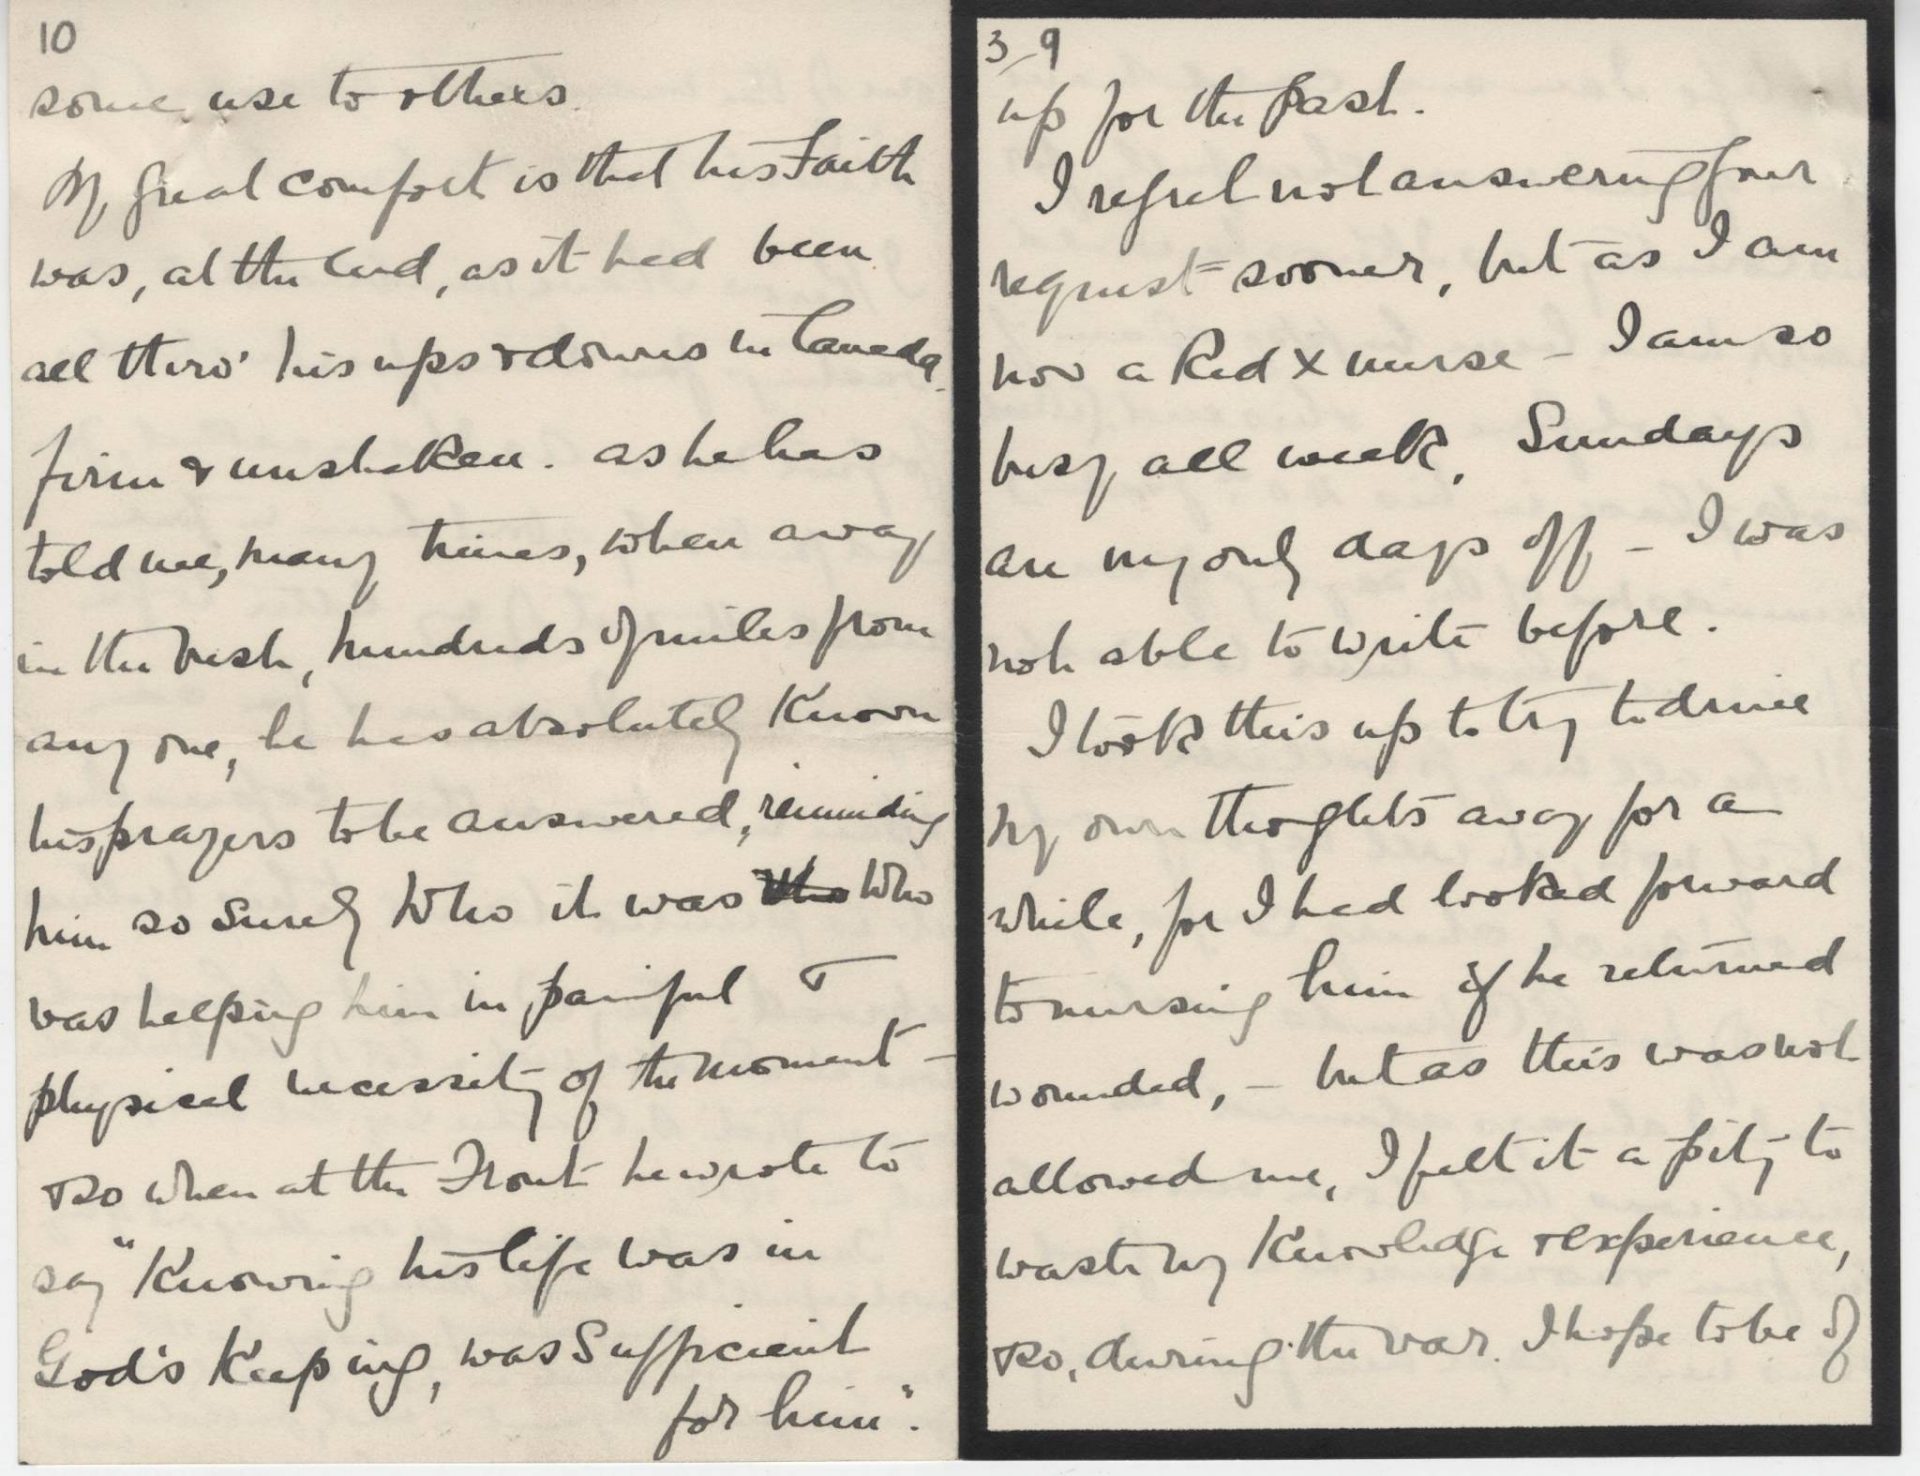 Sivell AG First Widow Letter 5